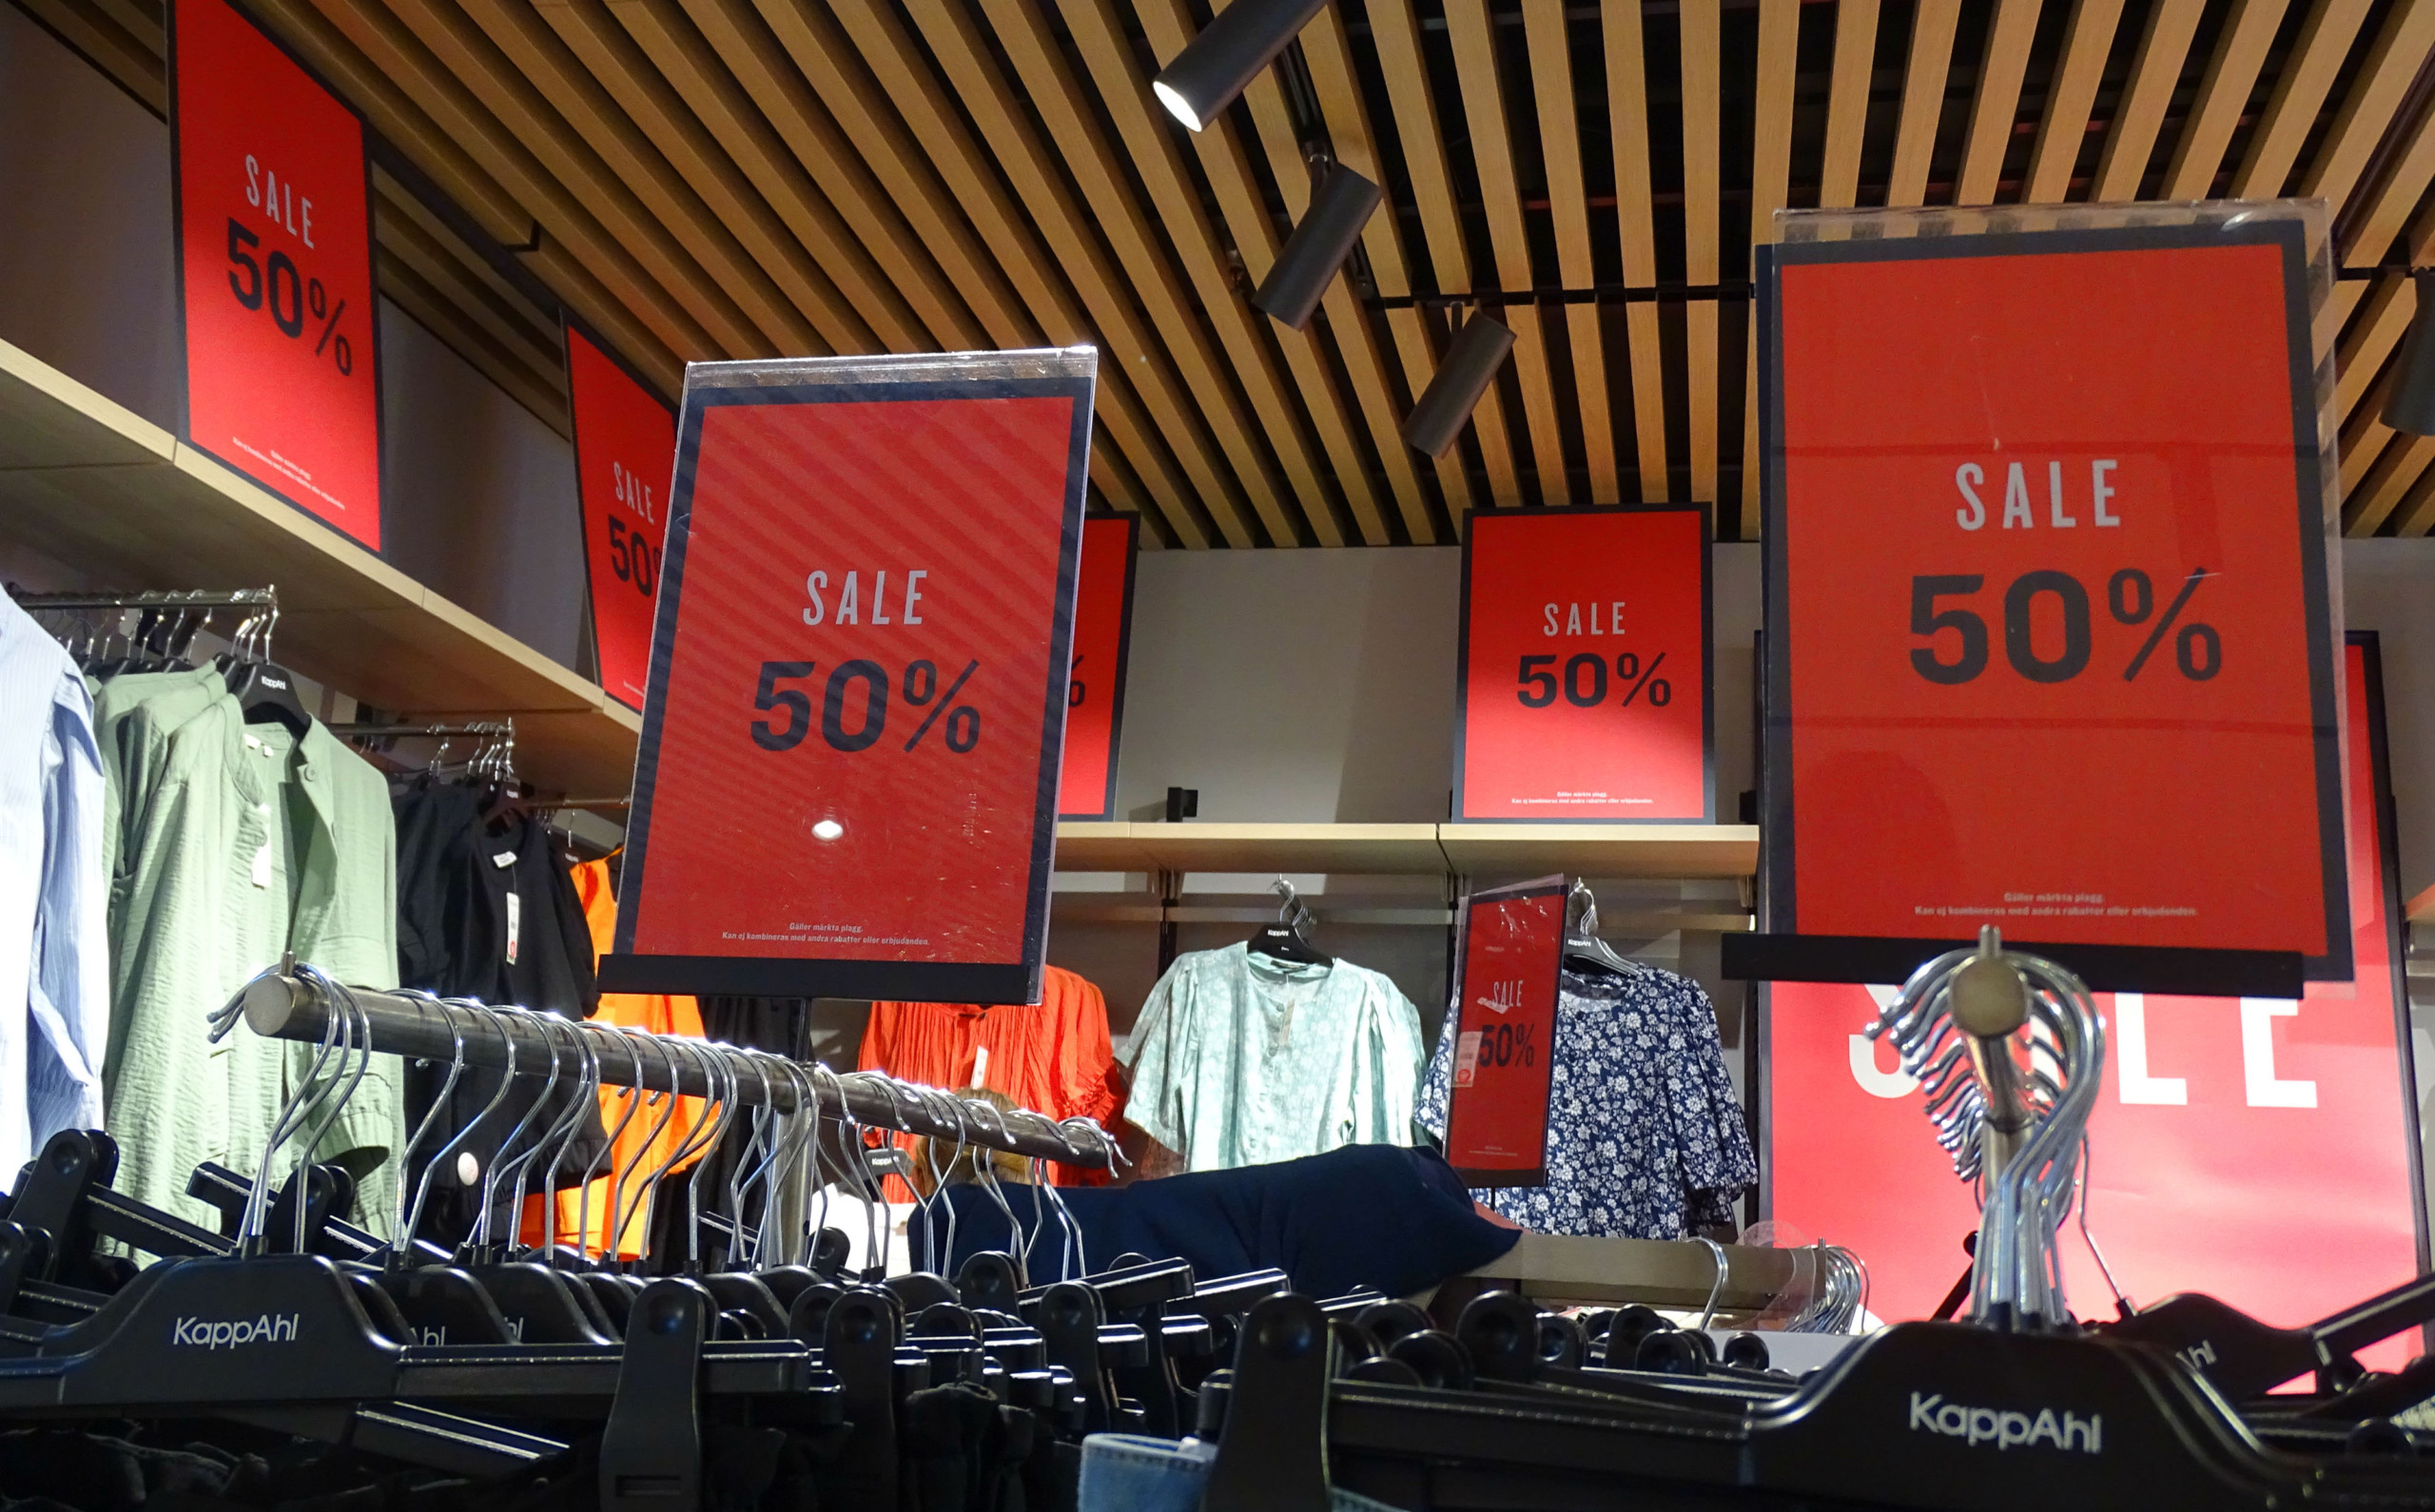 Never-ending sales threaten the sustainability of commerce